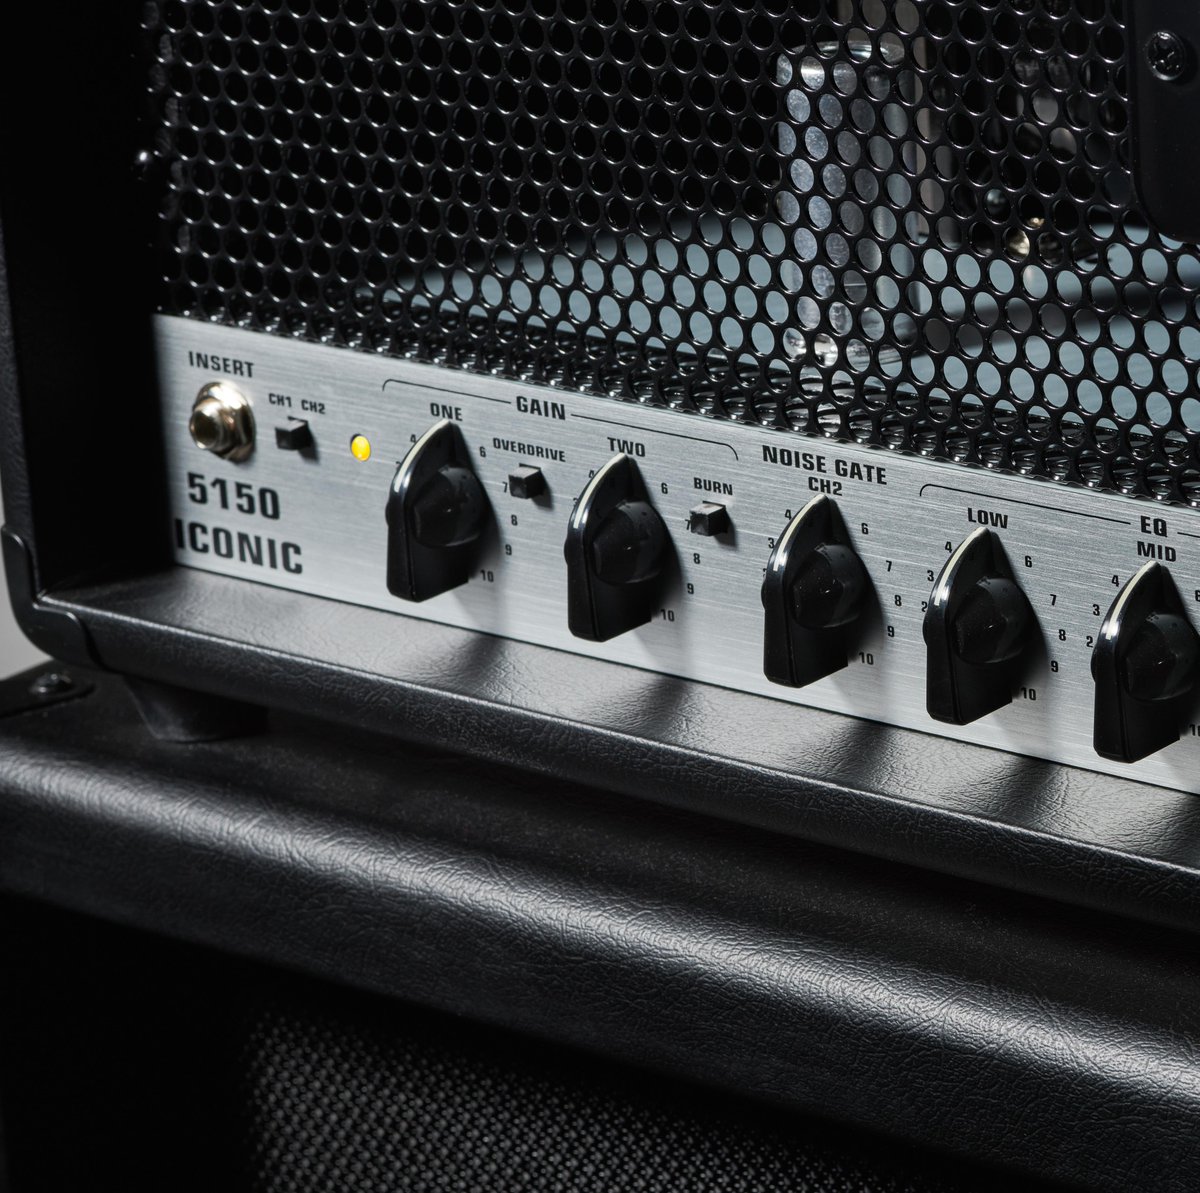 What's your favorite channel & go-to amp setting?